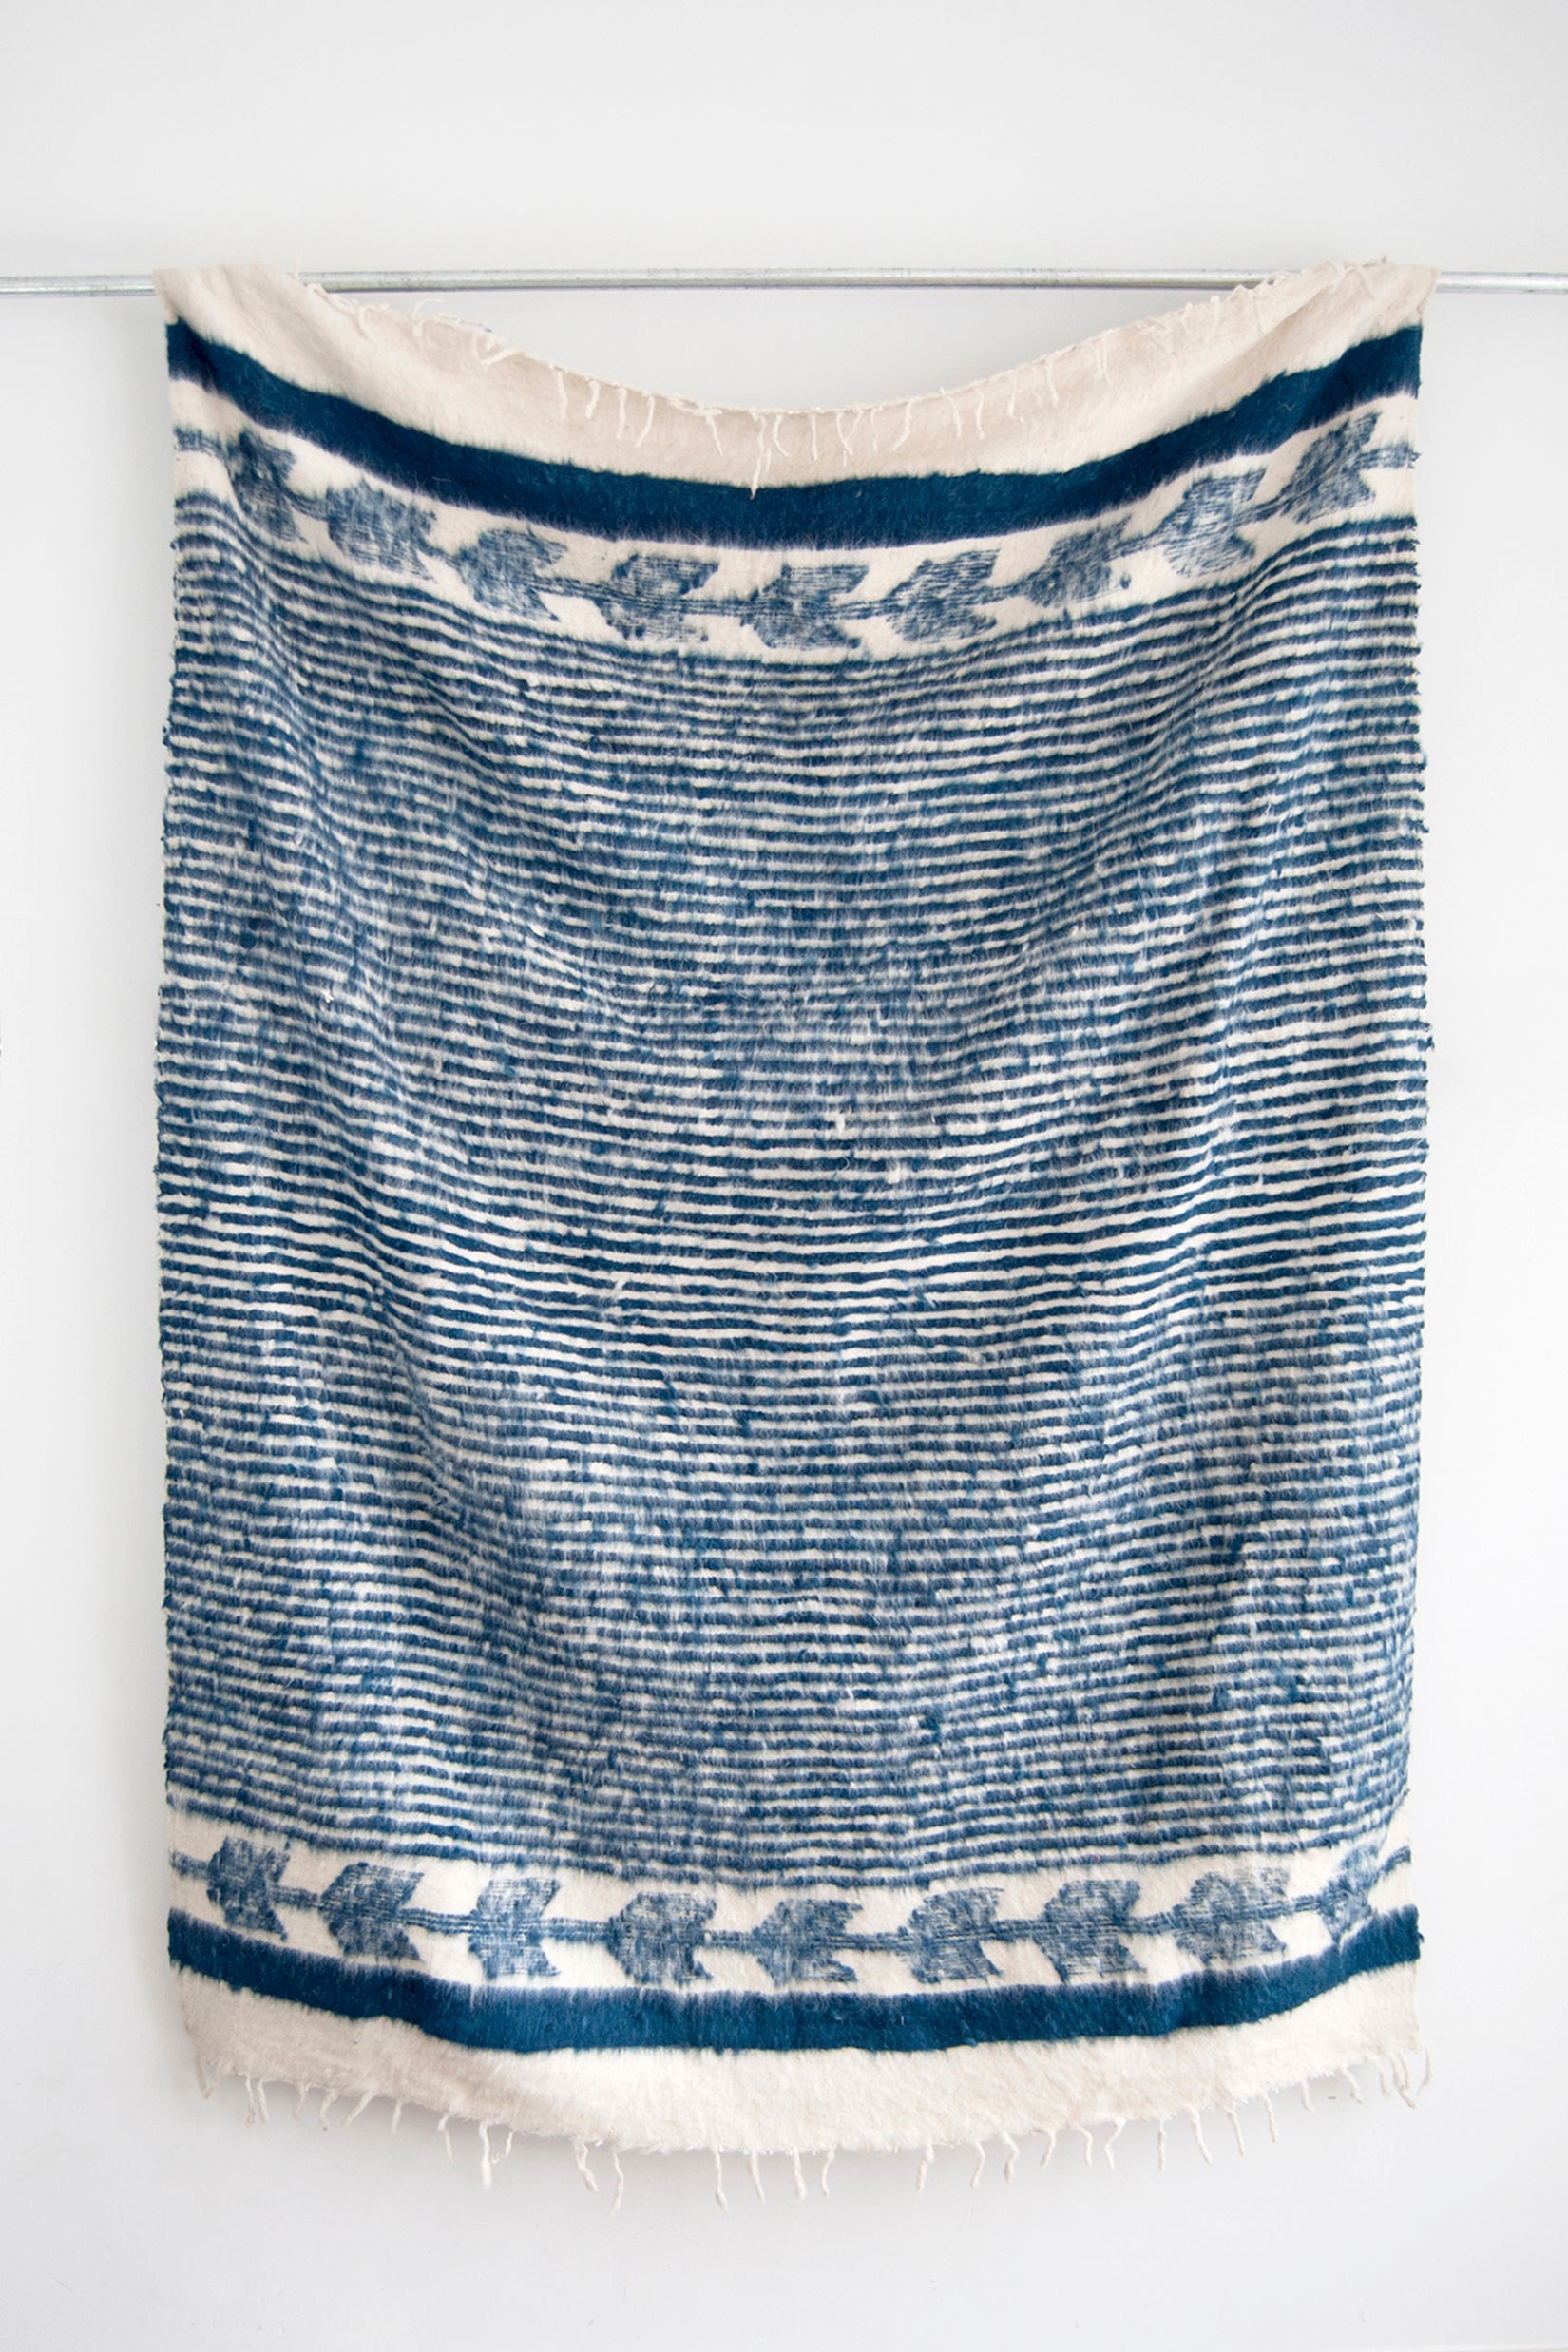 Queen sized ecru wool blanket with thin horizontal blue-indigo stripes throughout the body and blue-indigo arrow motif at both ends